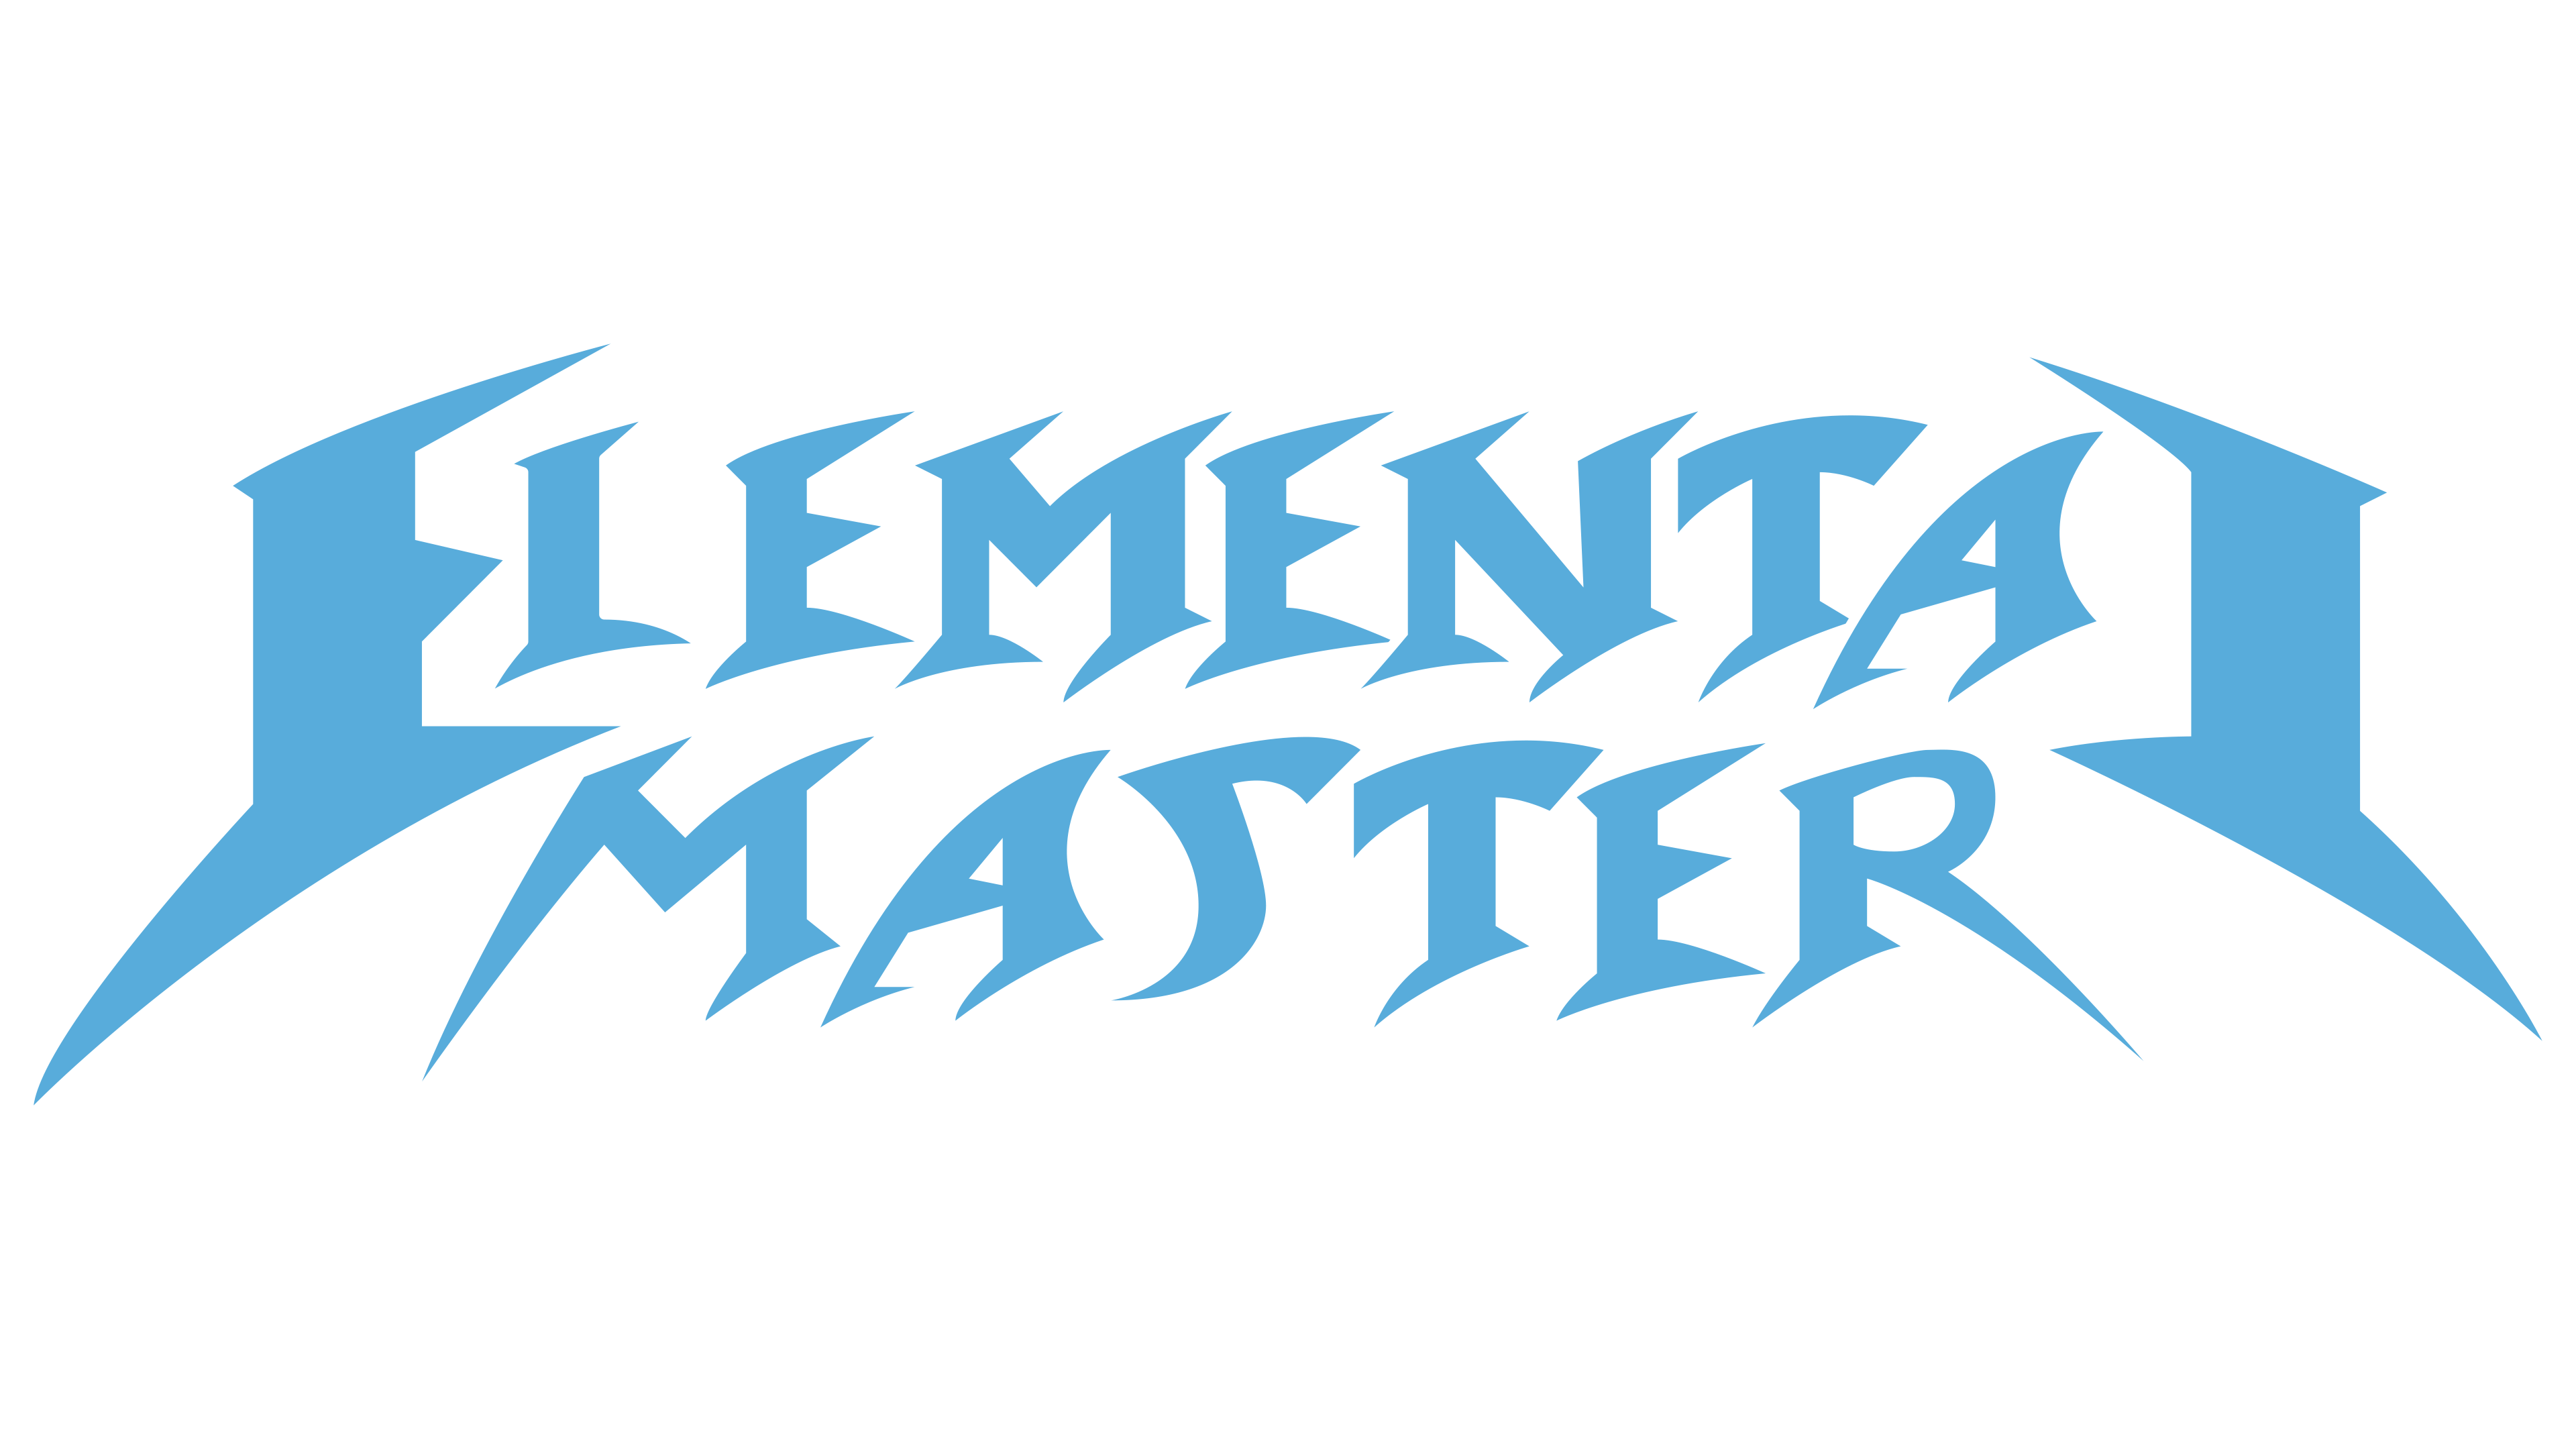 Elemental master. Элементал мастер. Elemental Master игра сега. Elemental games logo. Daily Driven лого.